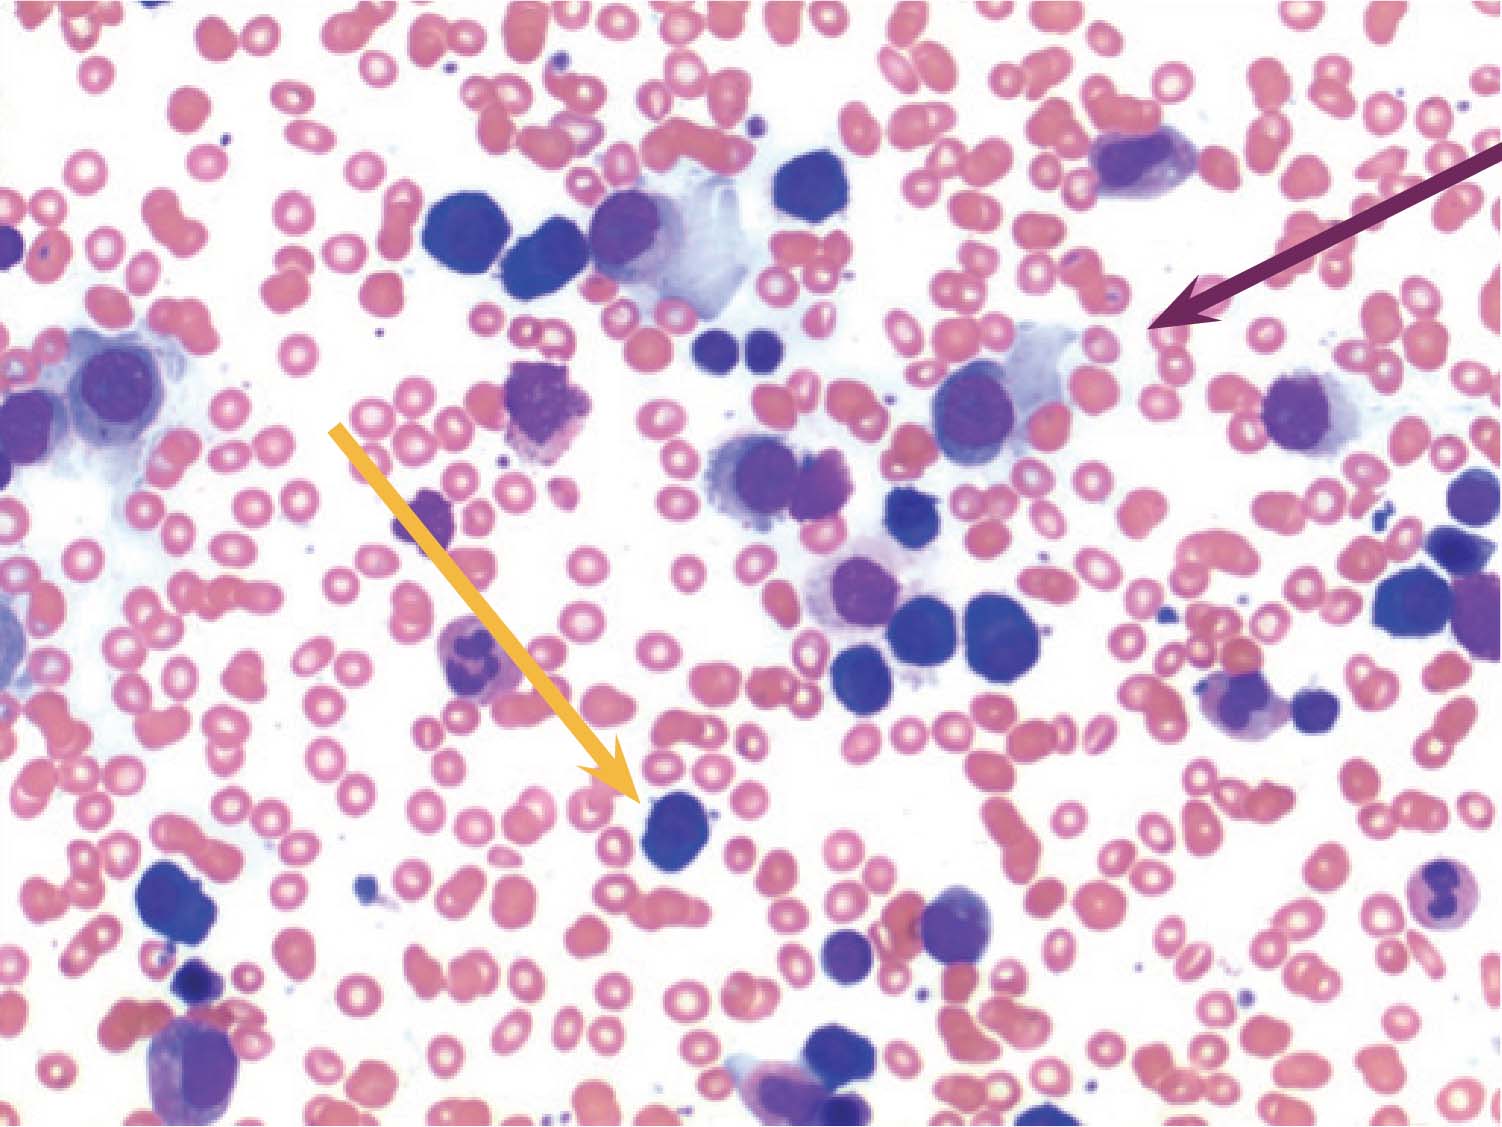 H&E stain of bone marrow aspirate High power field (x100). Small lymphocytes (orange arrow) and plasma cells (purple arrow) are clearly seen.